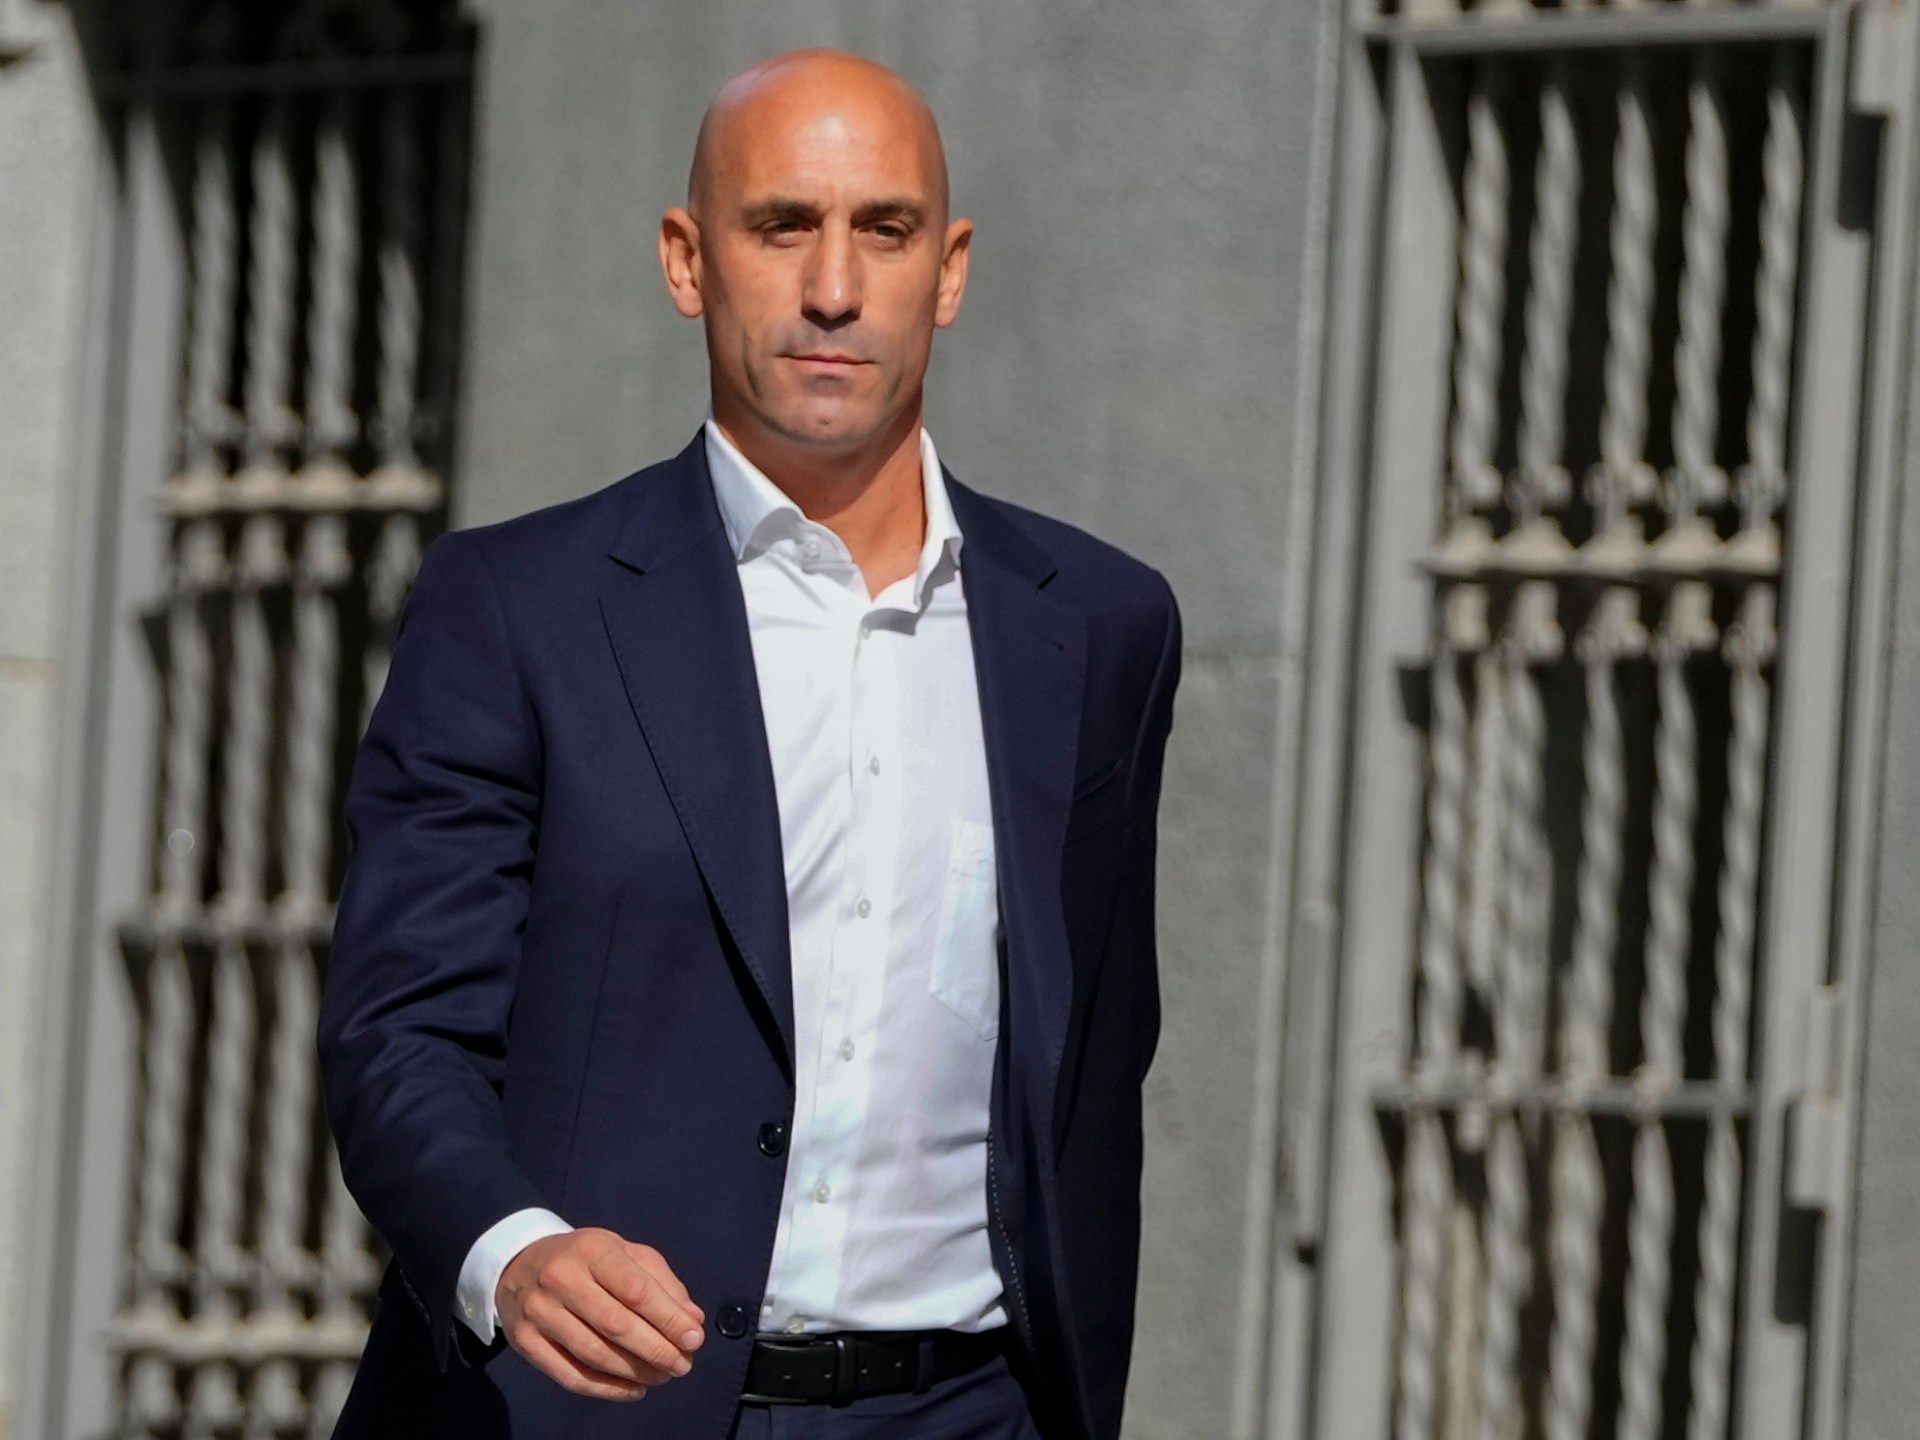 Luis Rubiales ‘forcefully kissed’ England player at Women’s World Cup | Football News #Luis #Rubiales #forcefully #kissed #England #player #Womens #World #Cup #Football #News